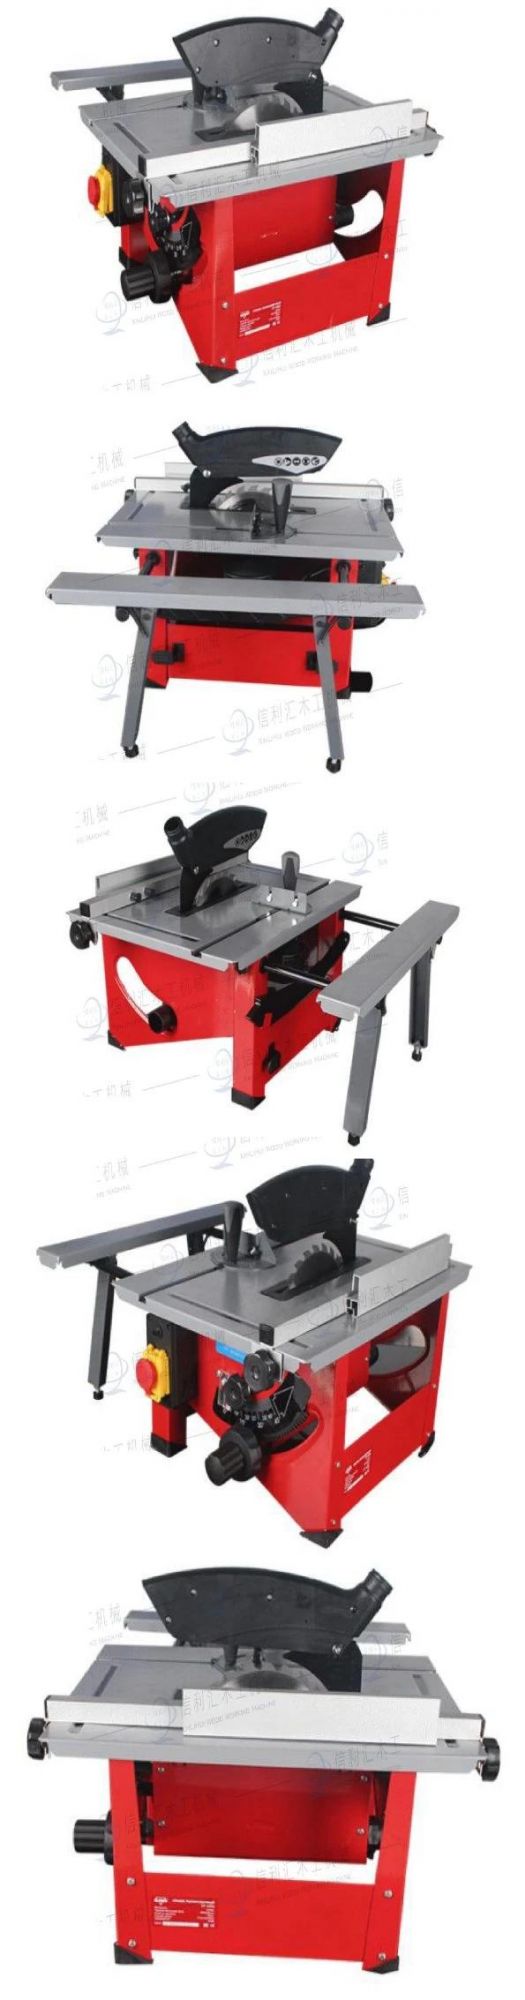 Table Saw with Low Price/Mini Table Saw Machine for Cutting 8 "Table Saw Table Cutter Carpenter CNC, CNC Carpenter Machine Hardware_Tool